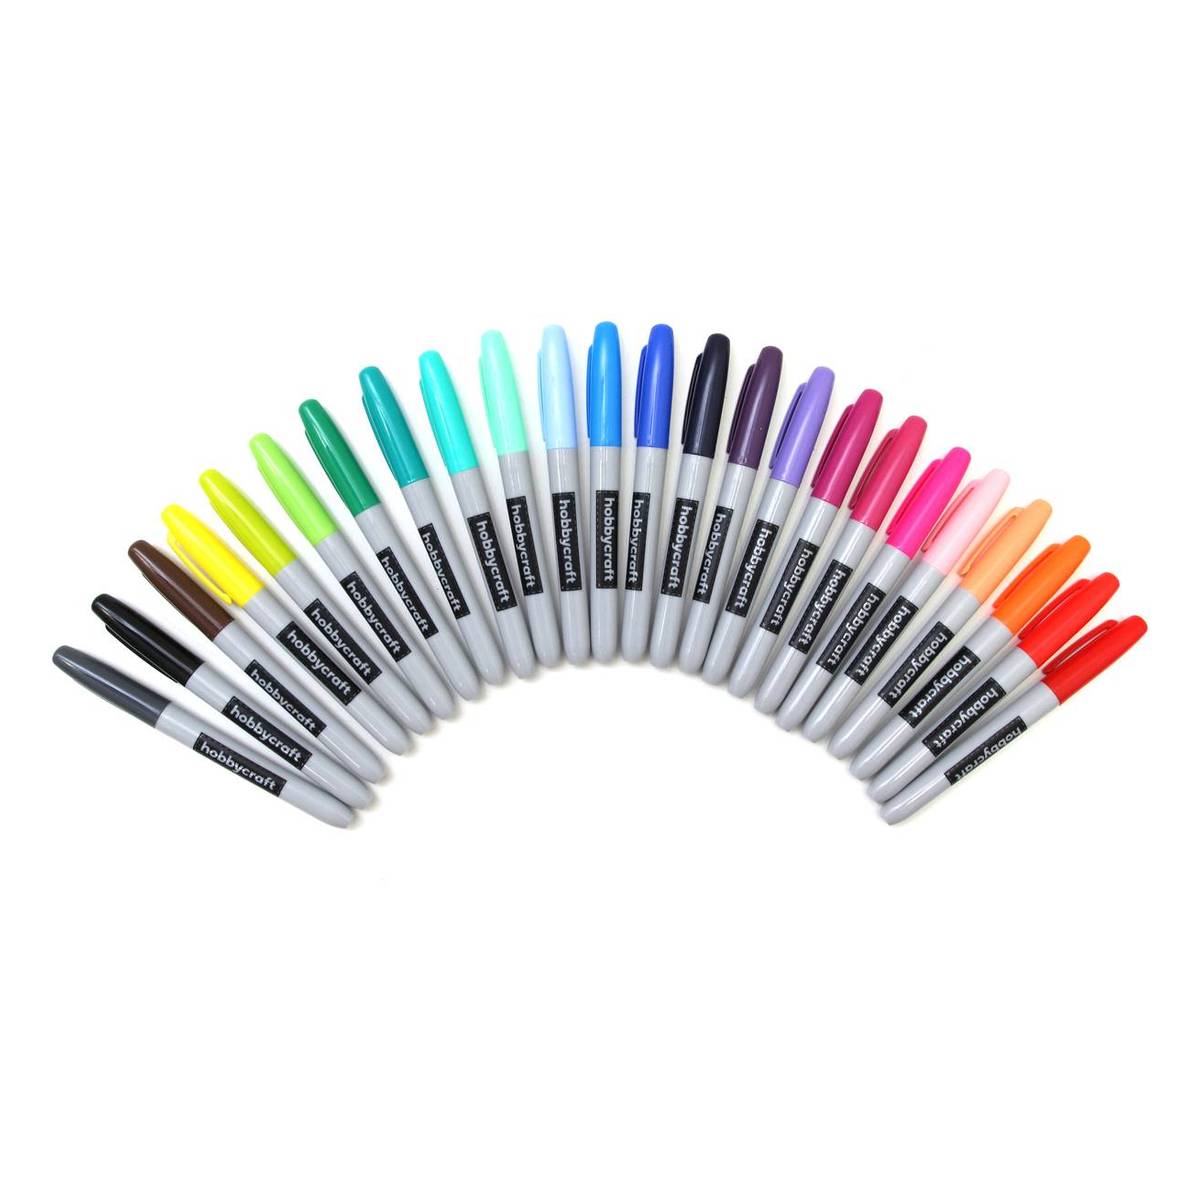 Permanent Markers 24 Pack